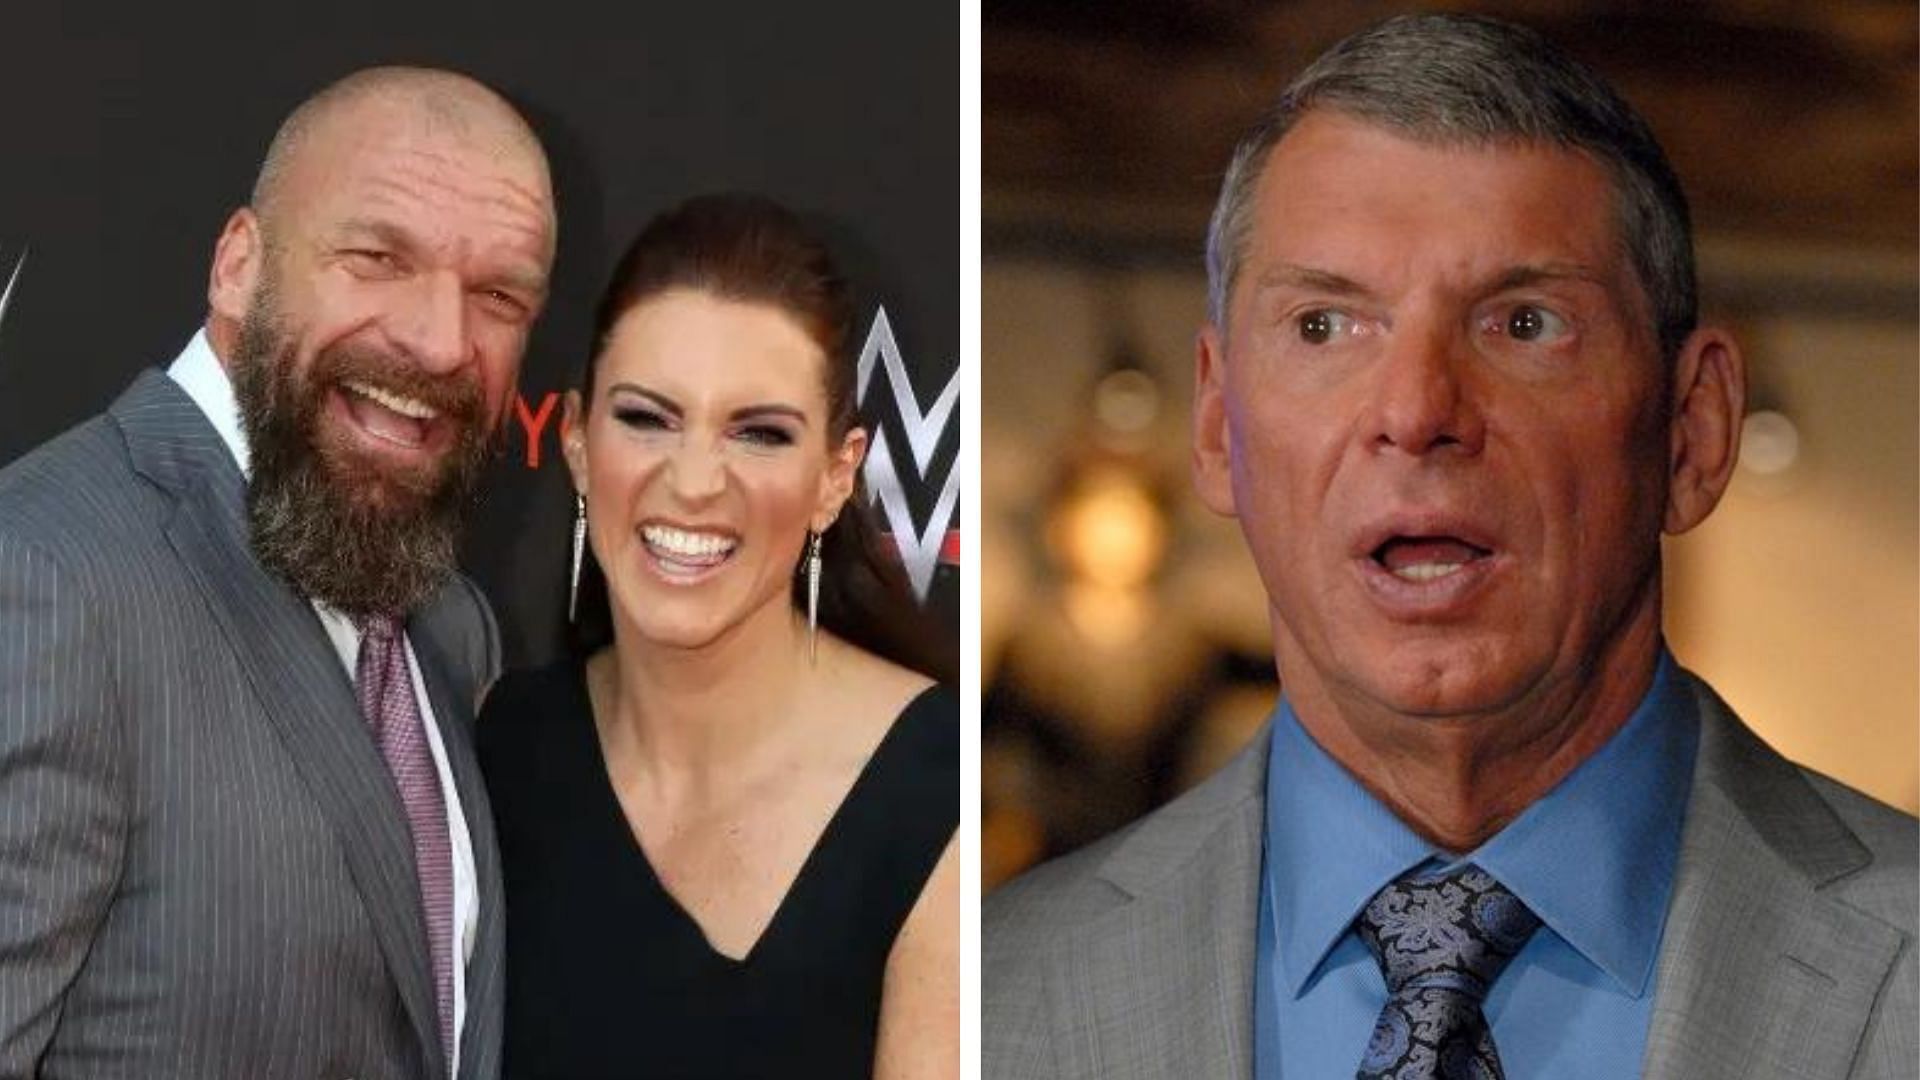 Stephanie McMahon departed WWE following Vince McMahon